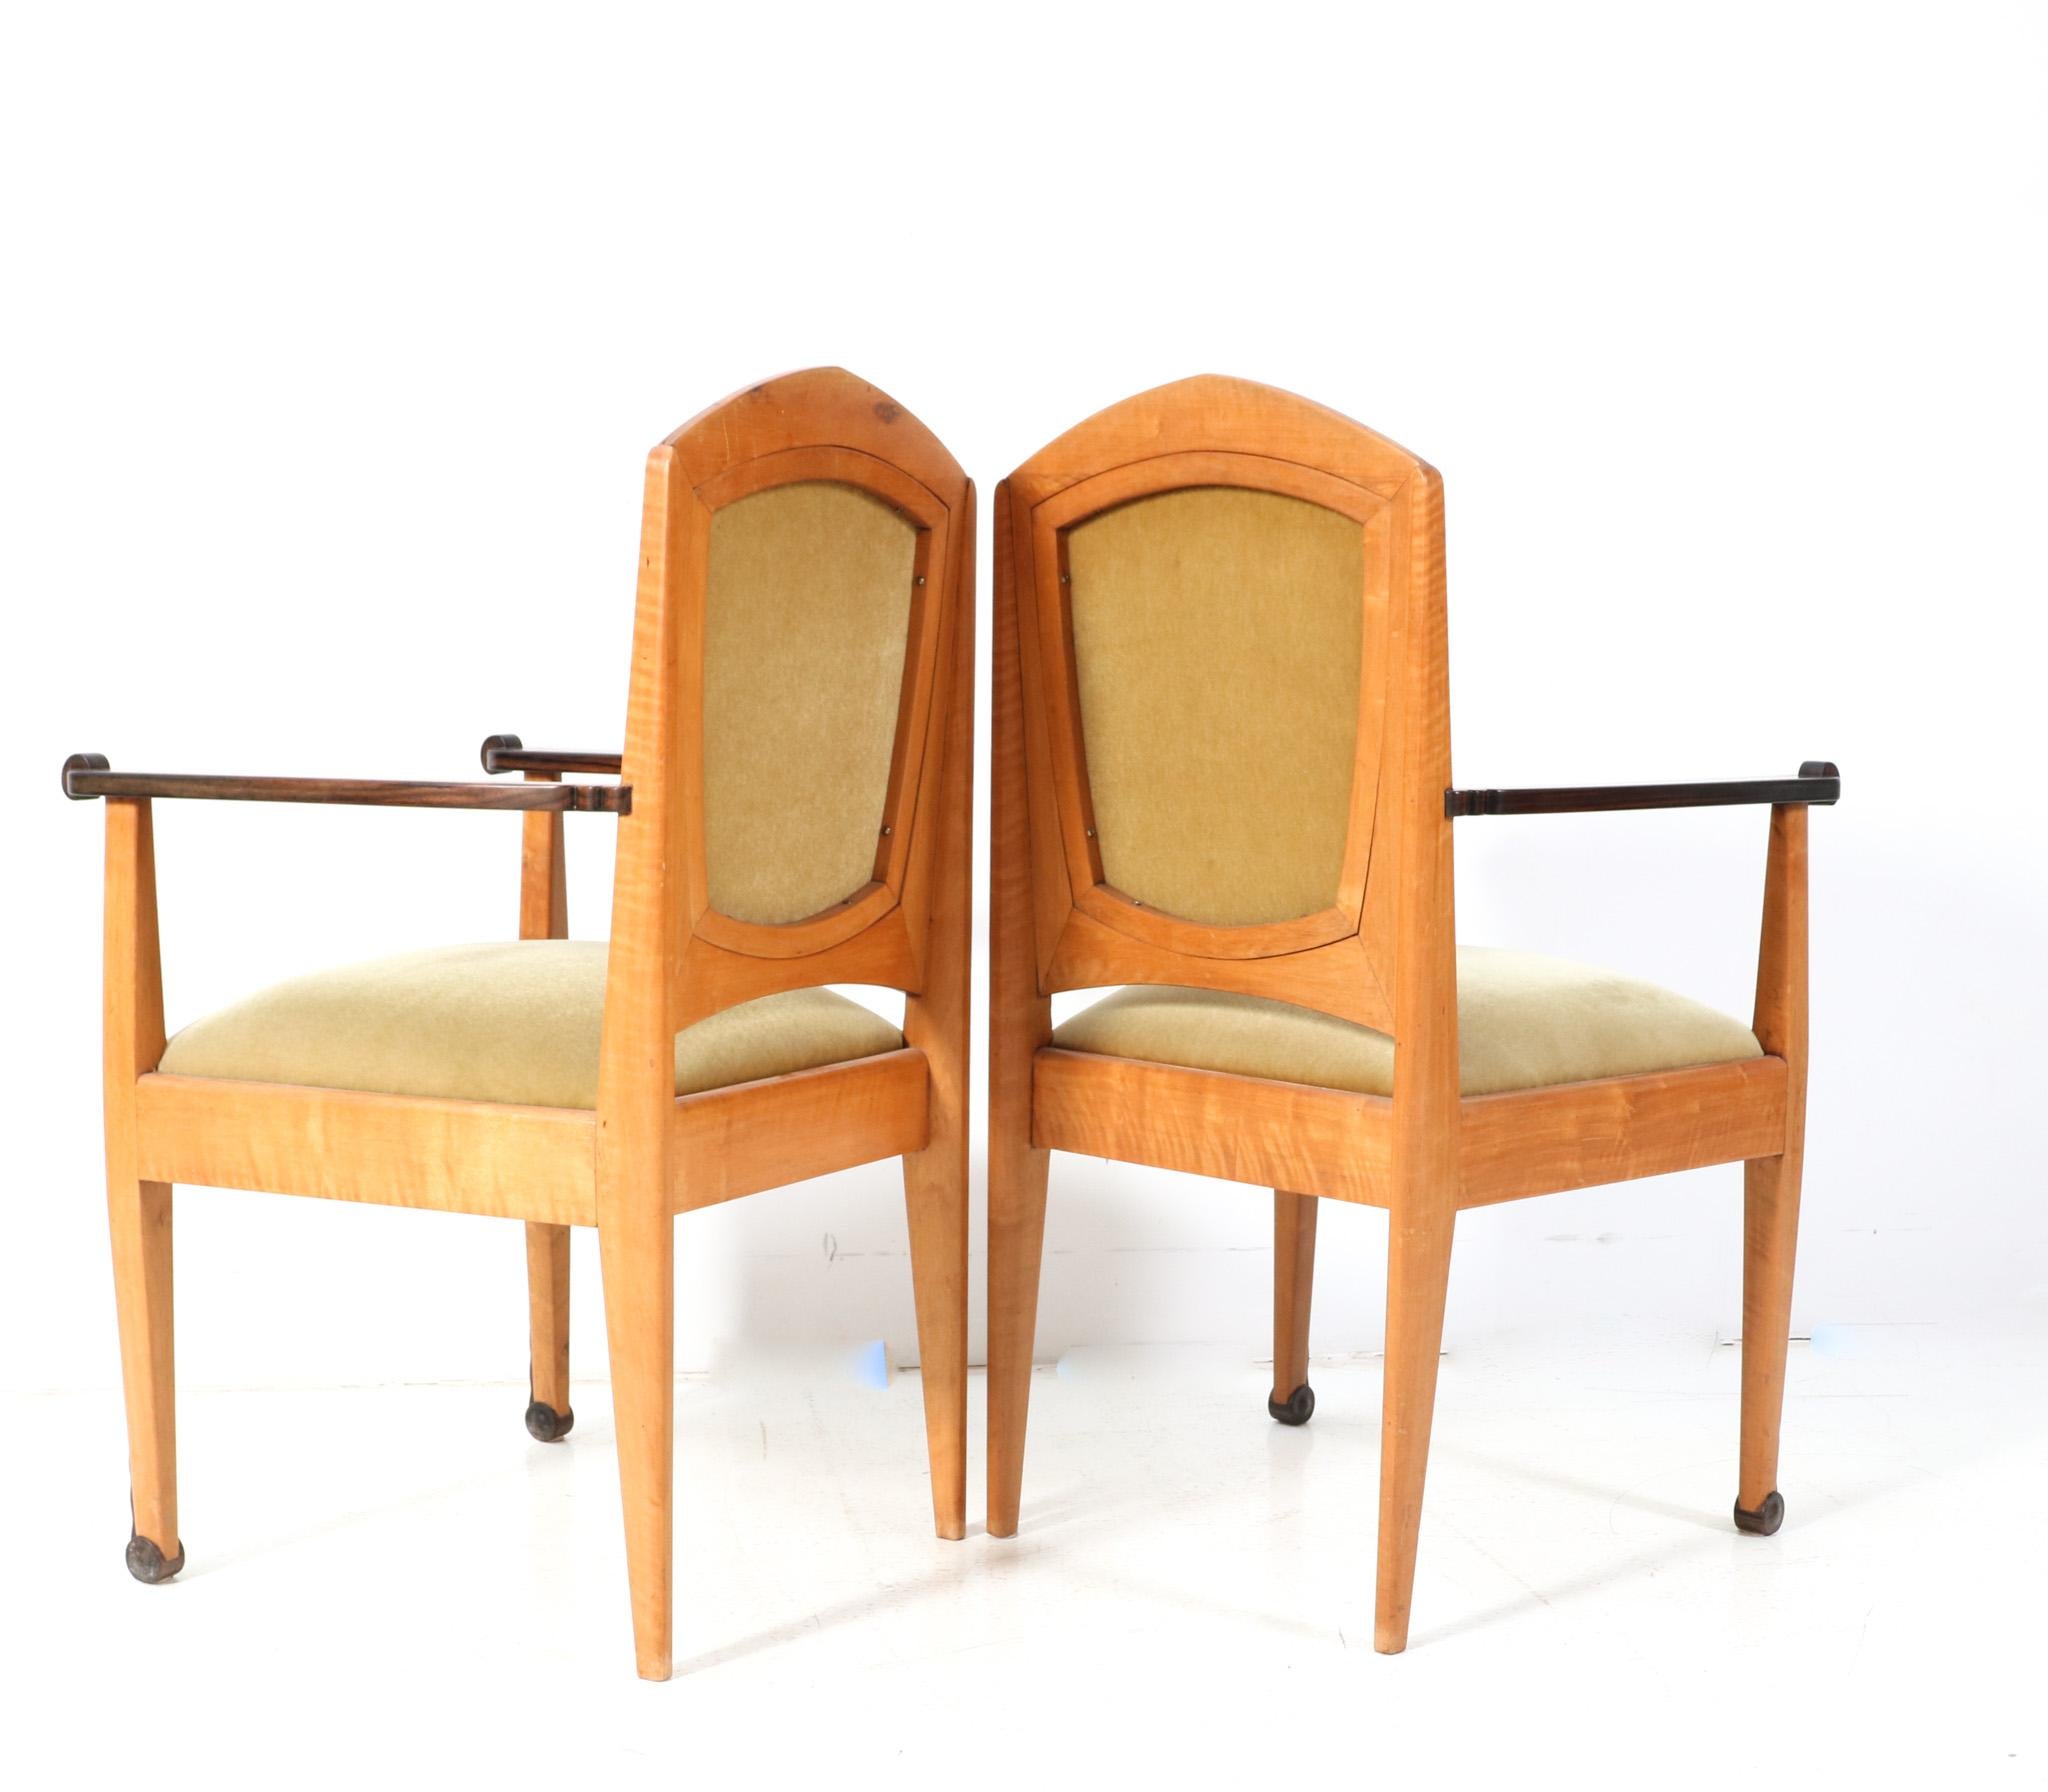 Set of Six Art Deco Amsterdamse School Dining Room Chairs by J.J. Zijfers, 1920s For Sale 4